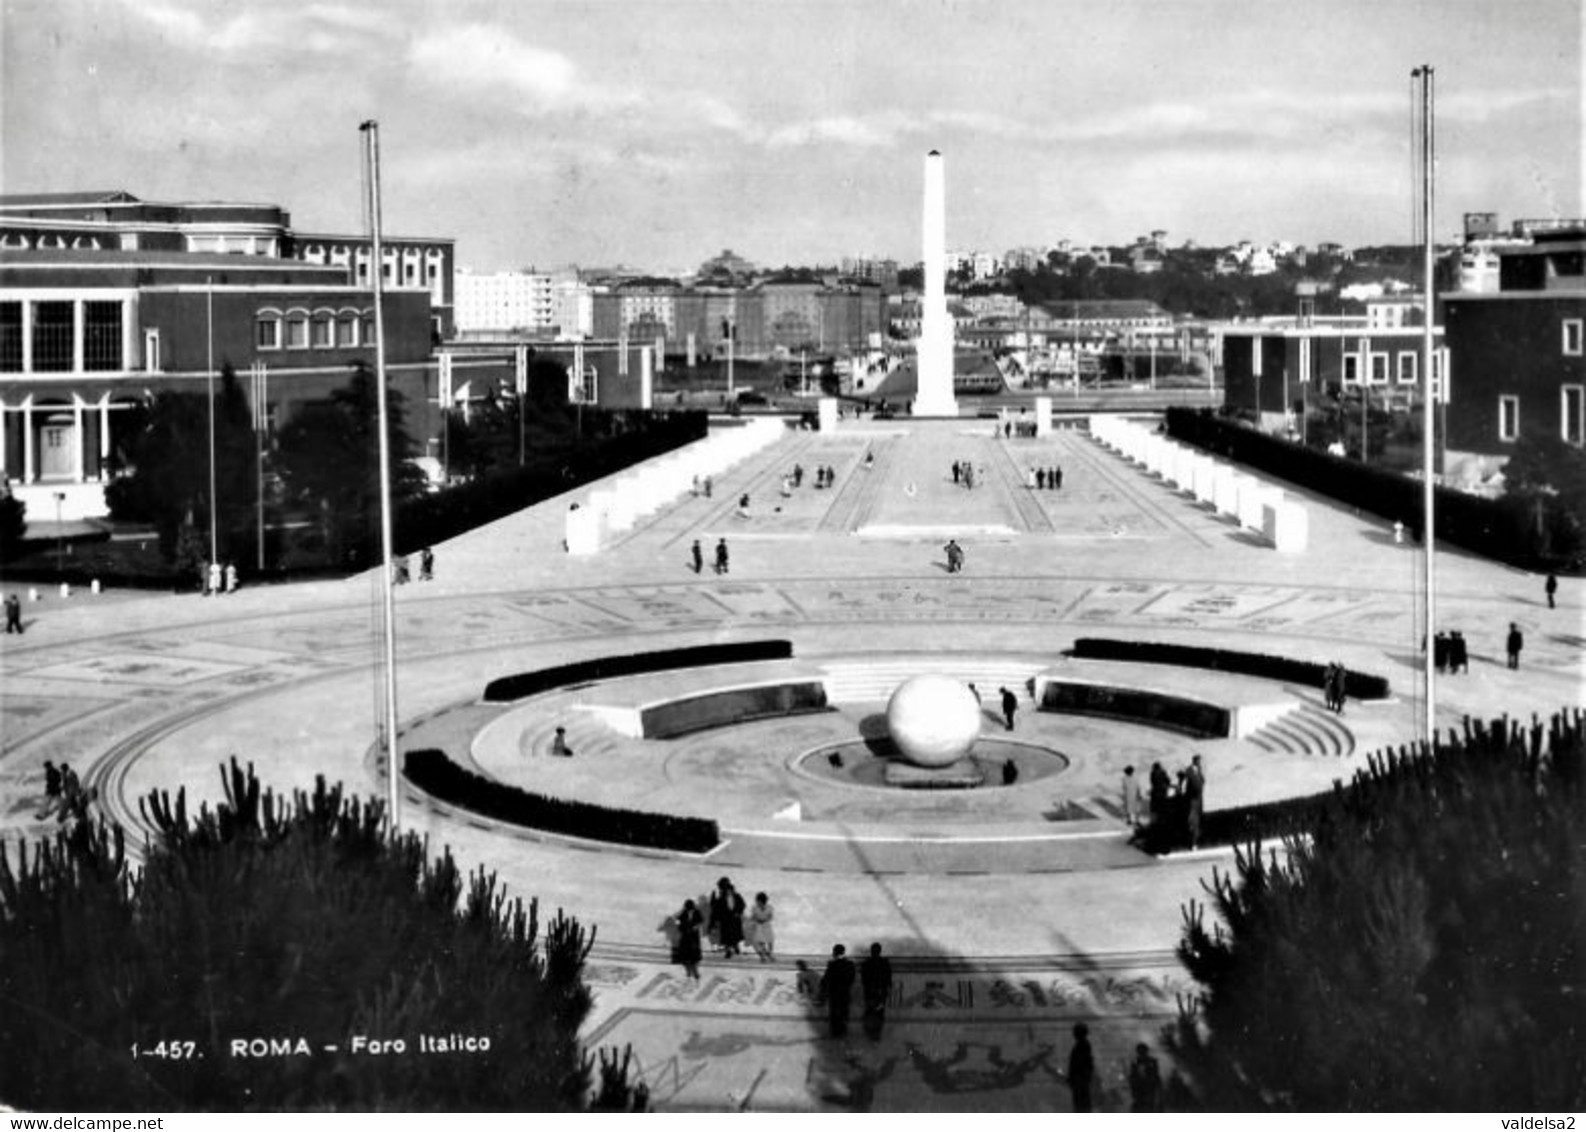 ROMA - FORO ITALICO - 1953 - Stades & Structures Sportives